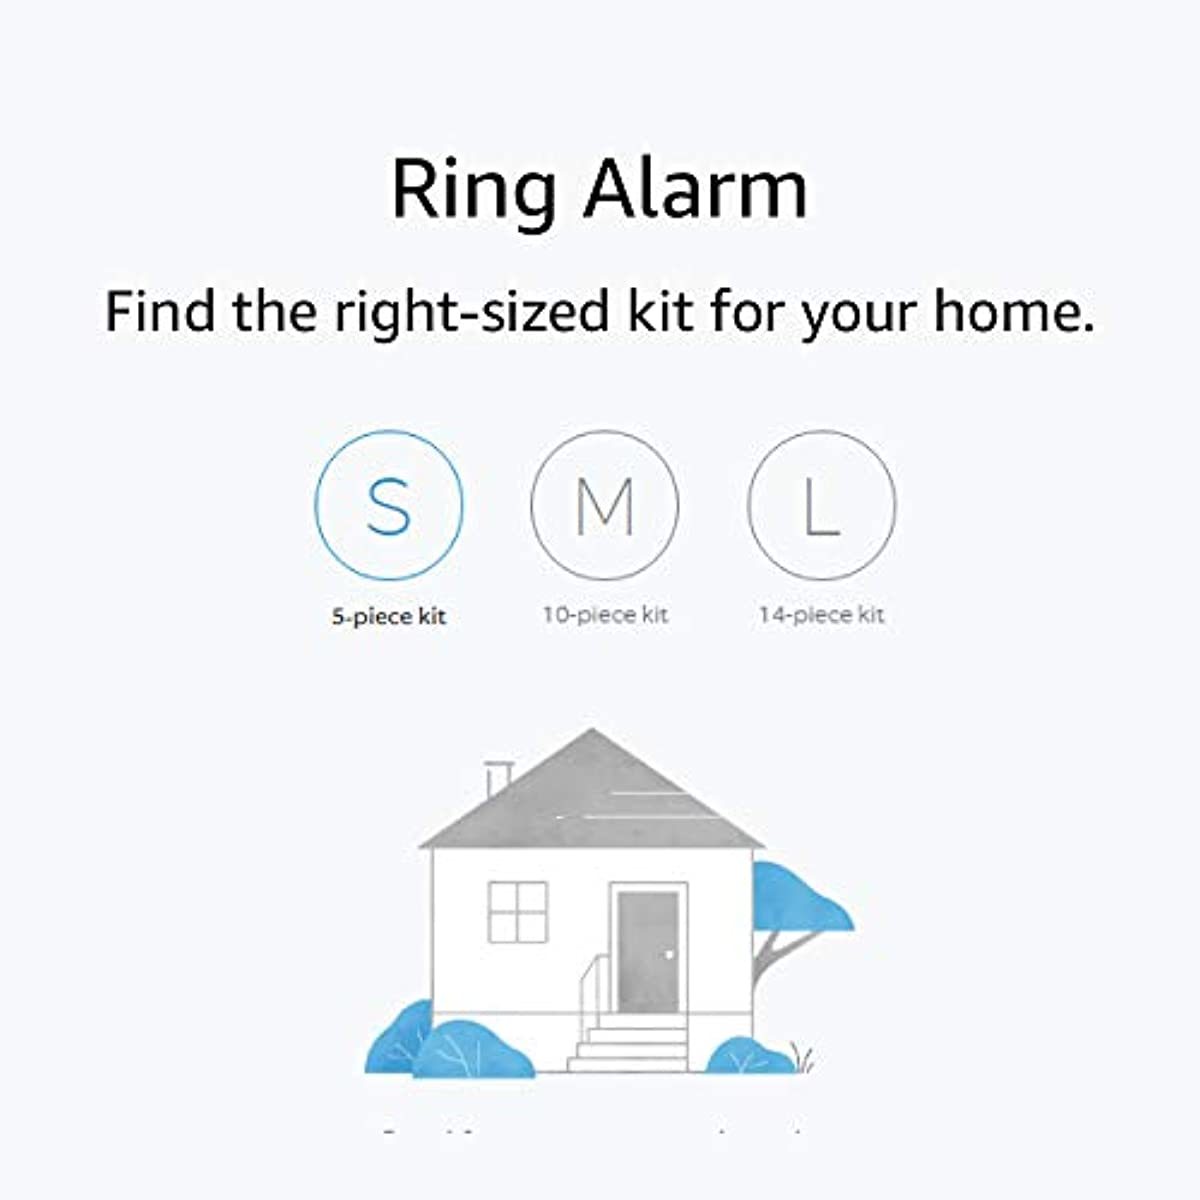 RING Ring Alarm 8-piece kit 2nd Gen Home Security System